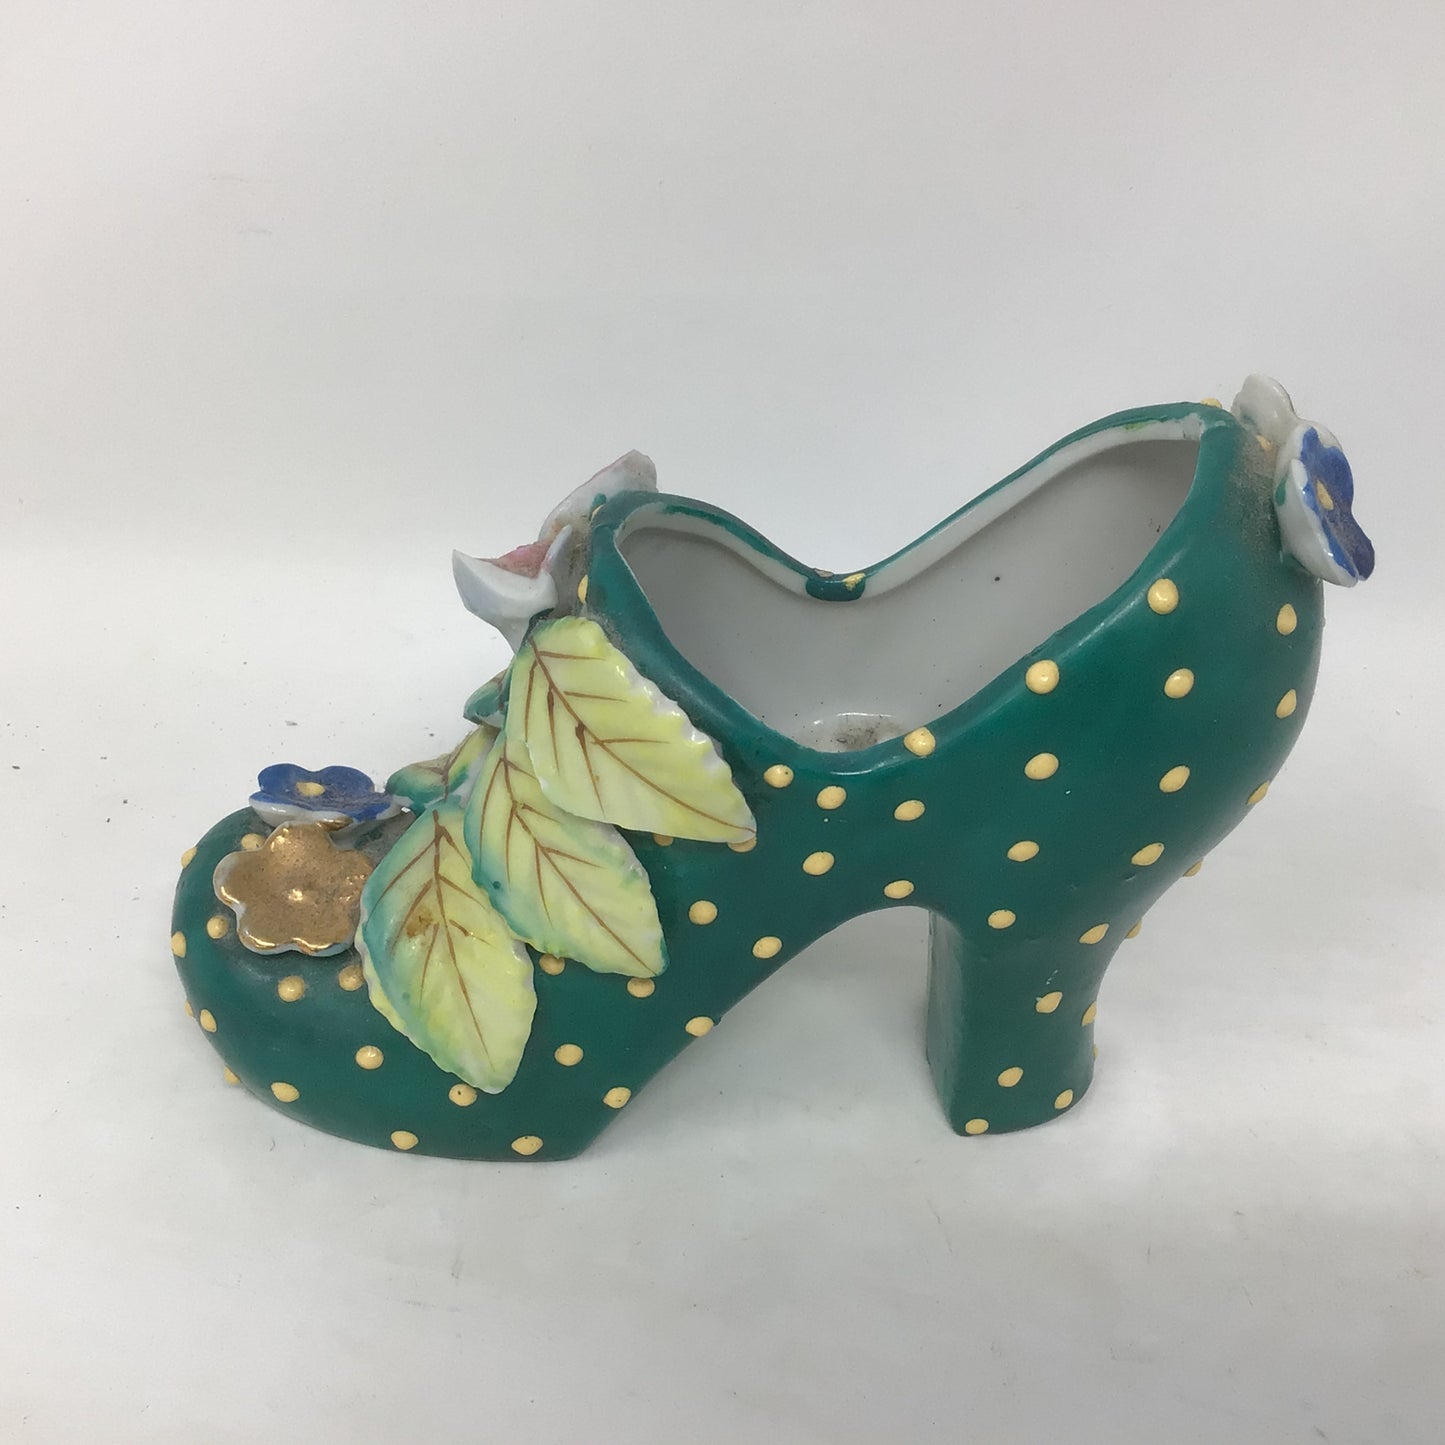 Vintage Porcelain High Heel Shoe Green with Raised Polka Dots from Japan.